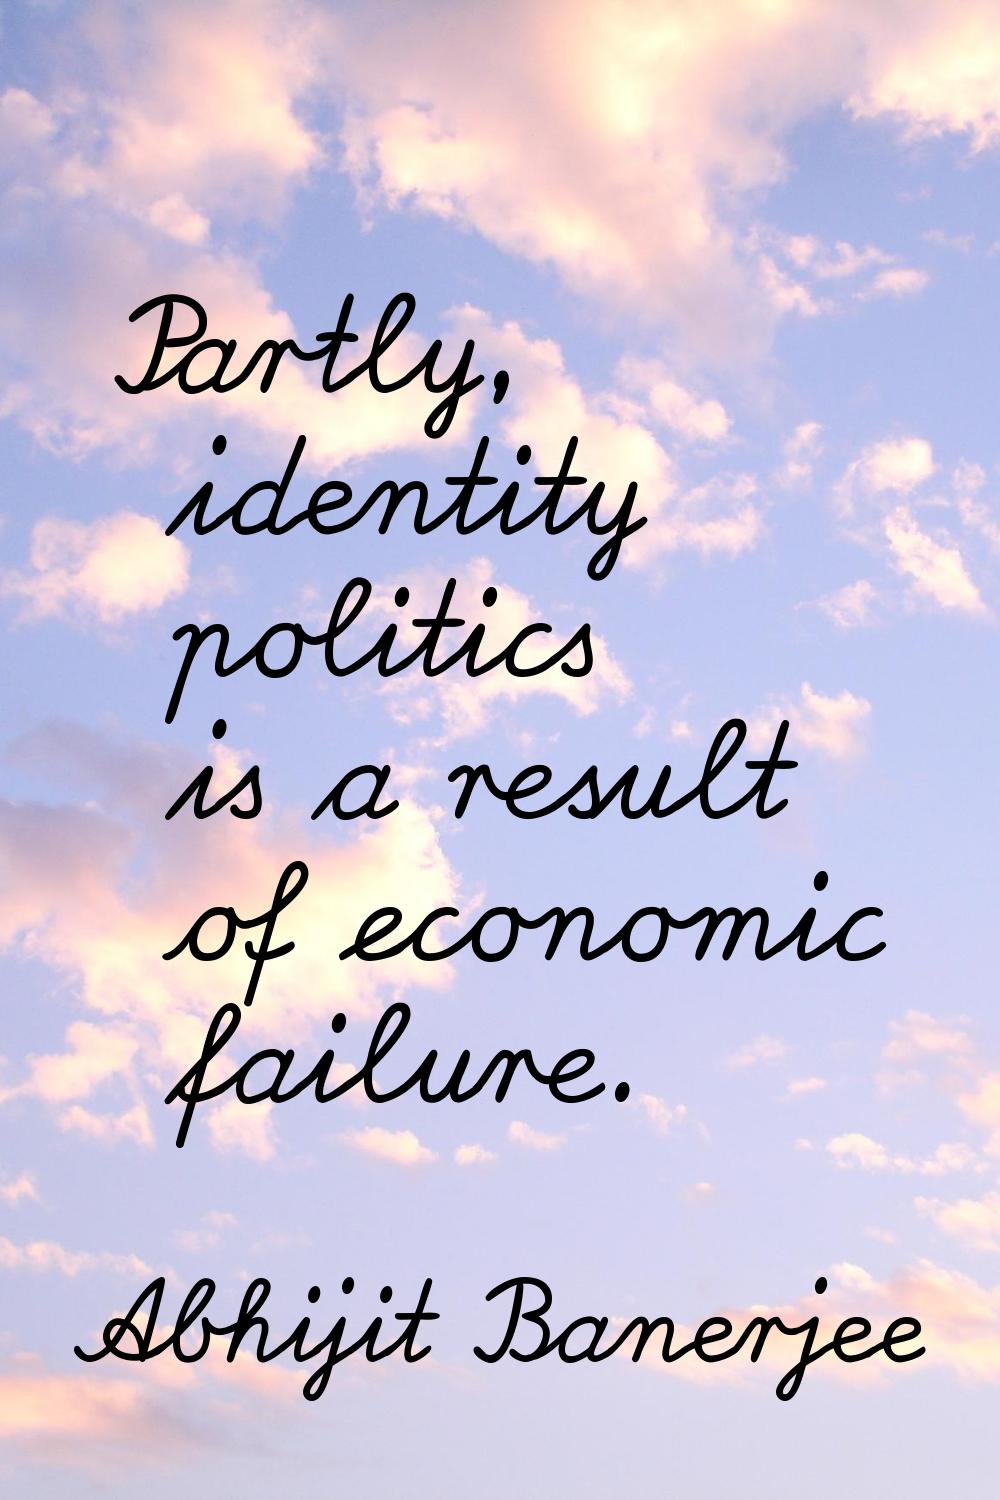 Partly, identity politics is a result of economic failure.